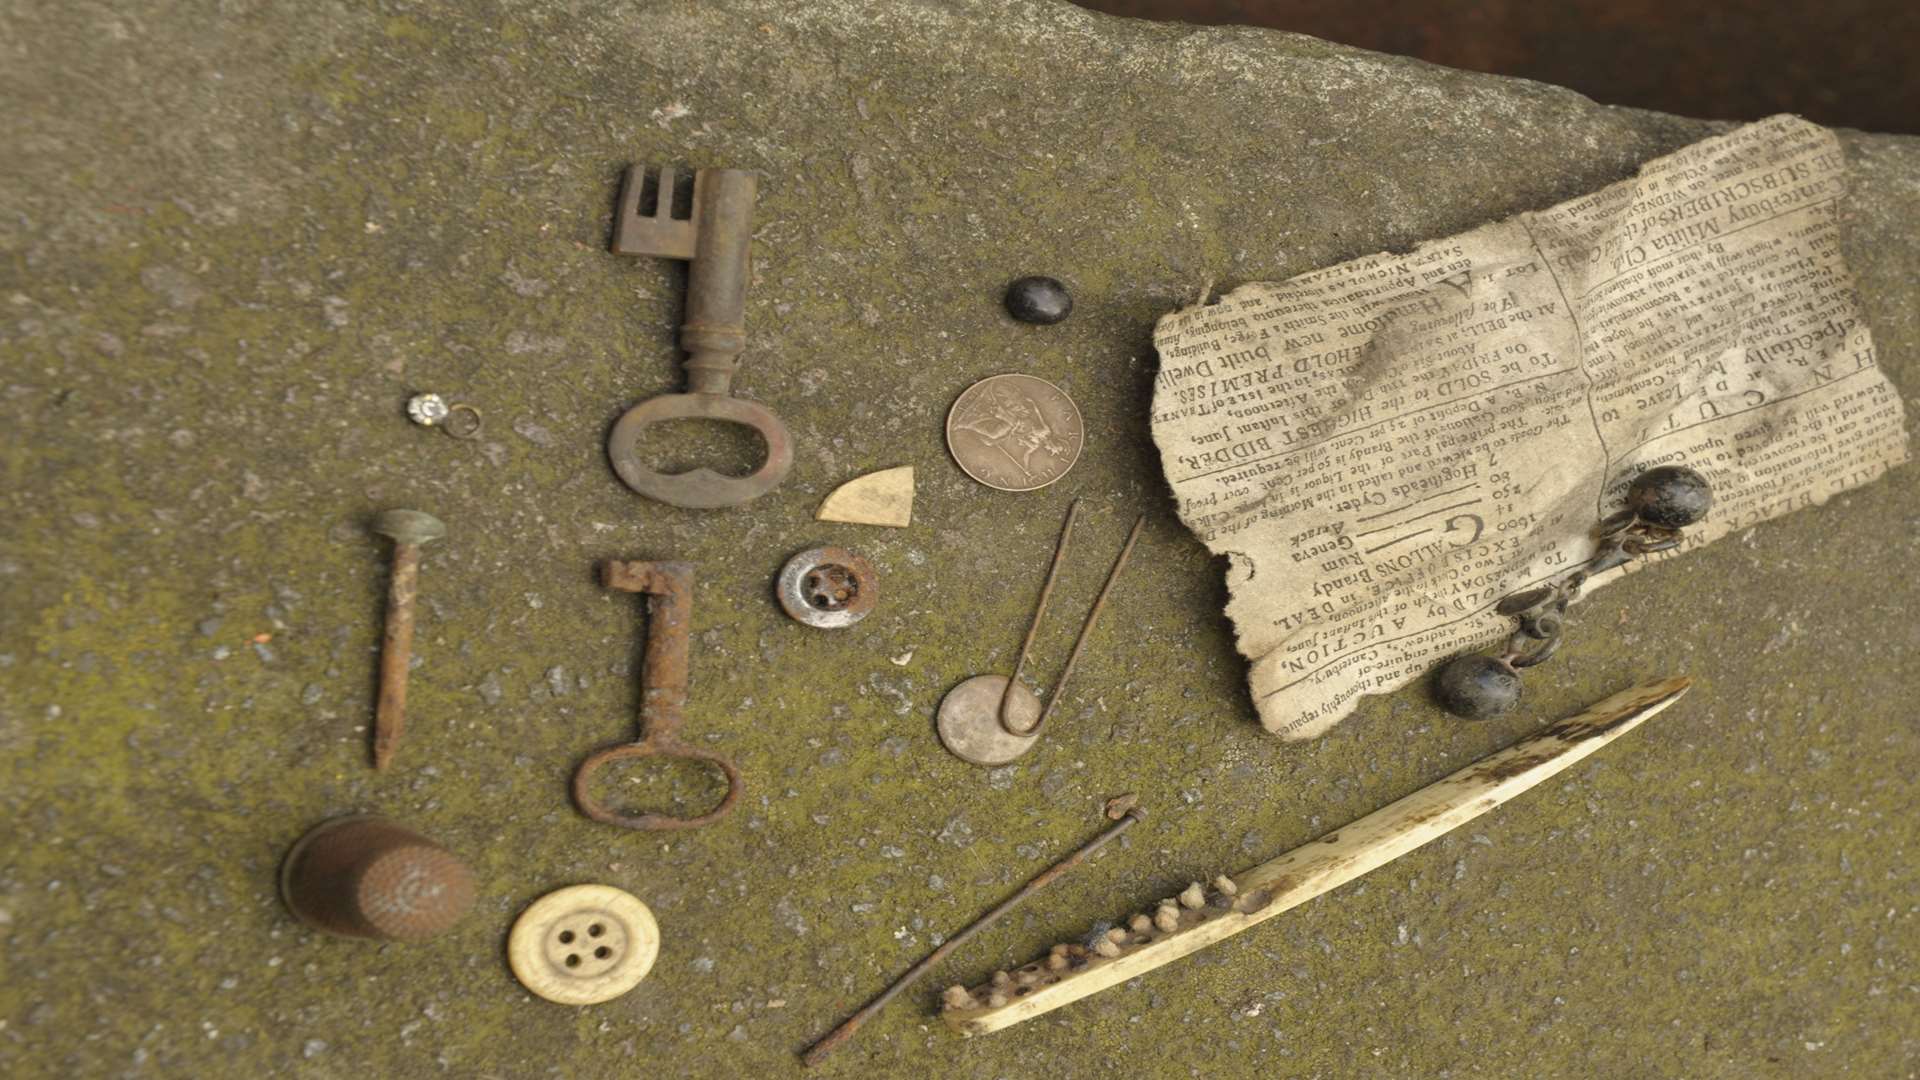 Some of the other items uncovered during the project. Picture: Steve Crispe